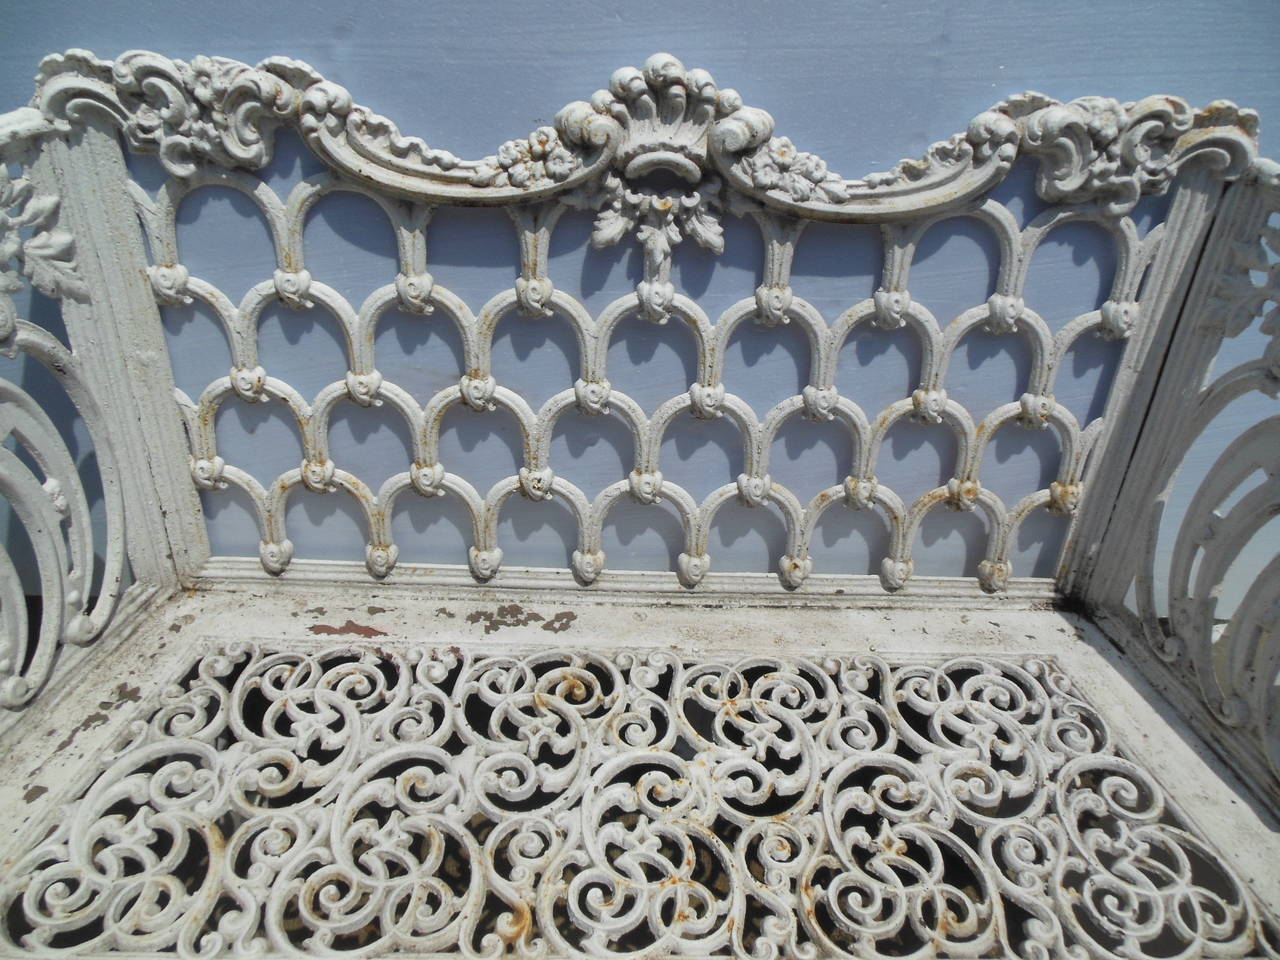 A late 19th century cast iron bench in the Gothic/Rococo Revival style.
This bench pattern became most popular when Jackie Kennedy bought one 
for the White House Rose Garden and has since then been called the White House Bench by many. It is in